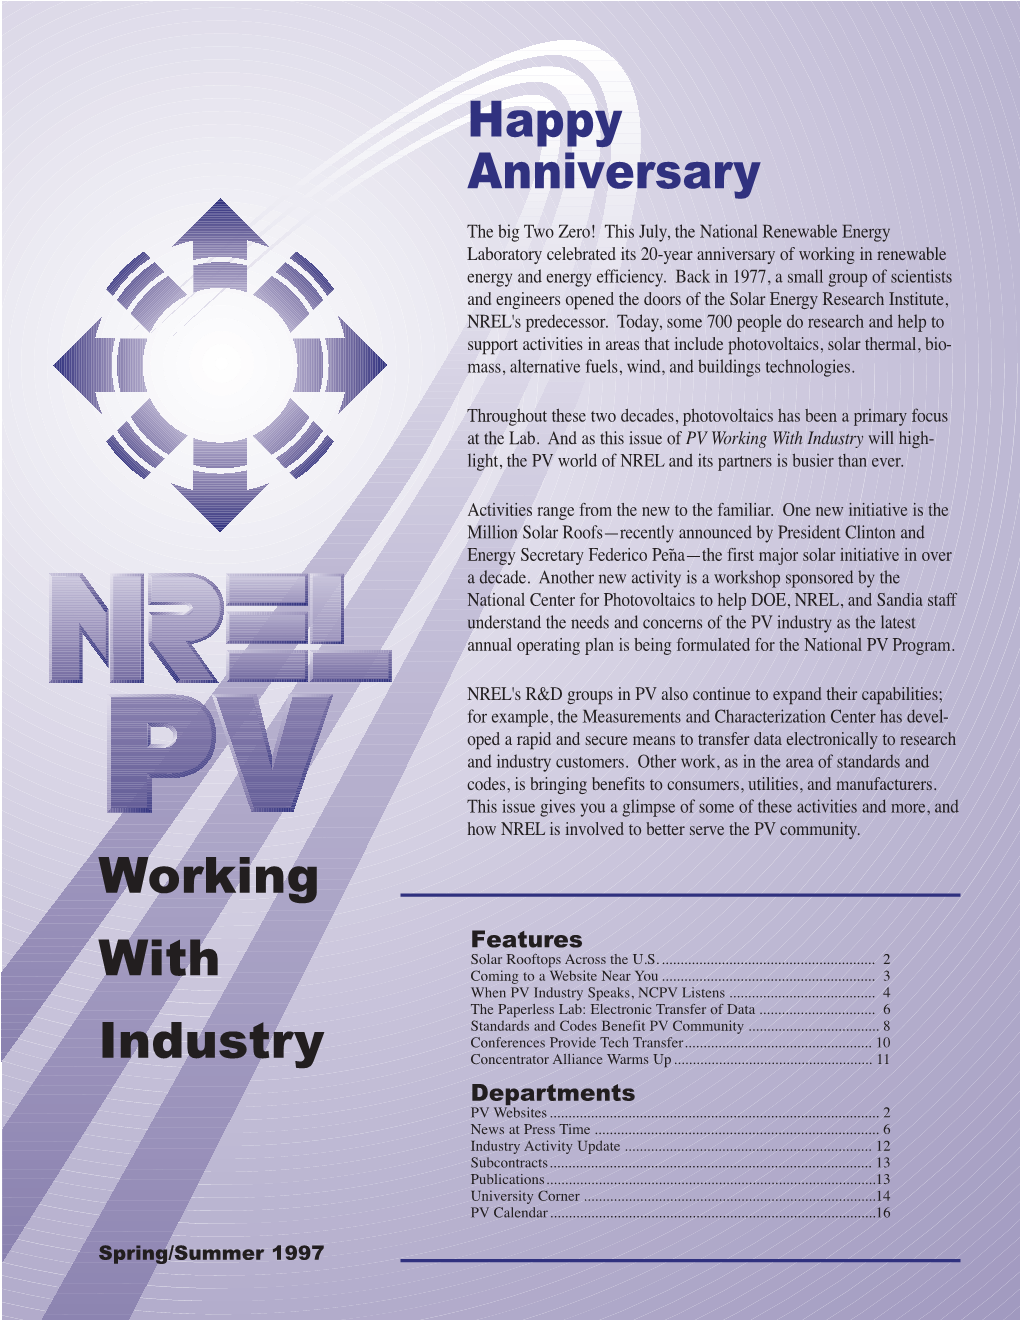 NREL PV Working with Industry, Spring/Summer 1997